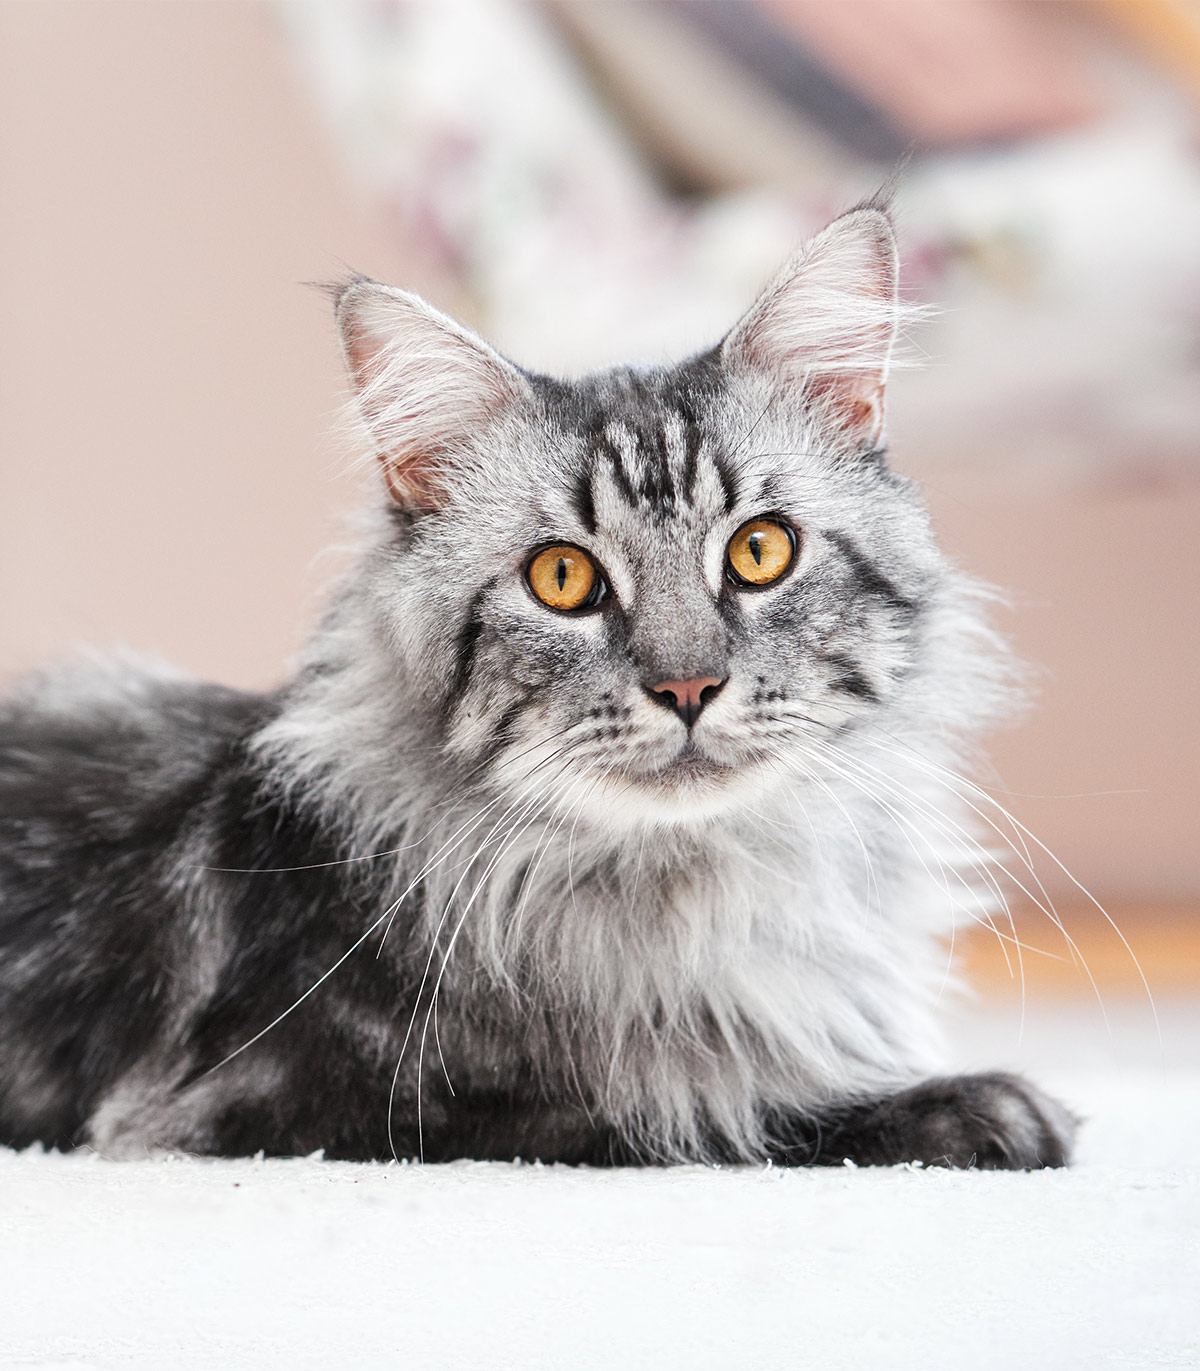 Check Out Our Beautiful Gallery Of Pictures Of Maine Coon Cats